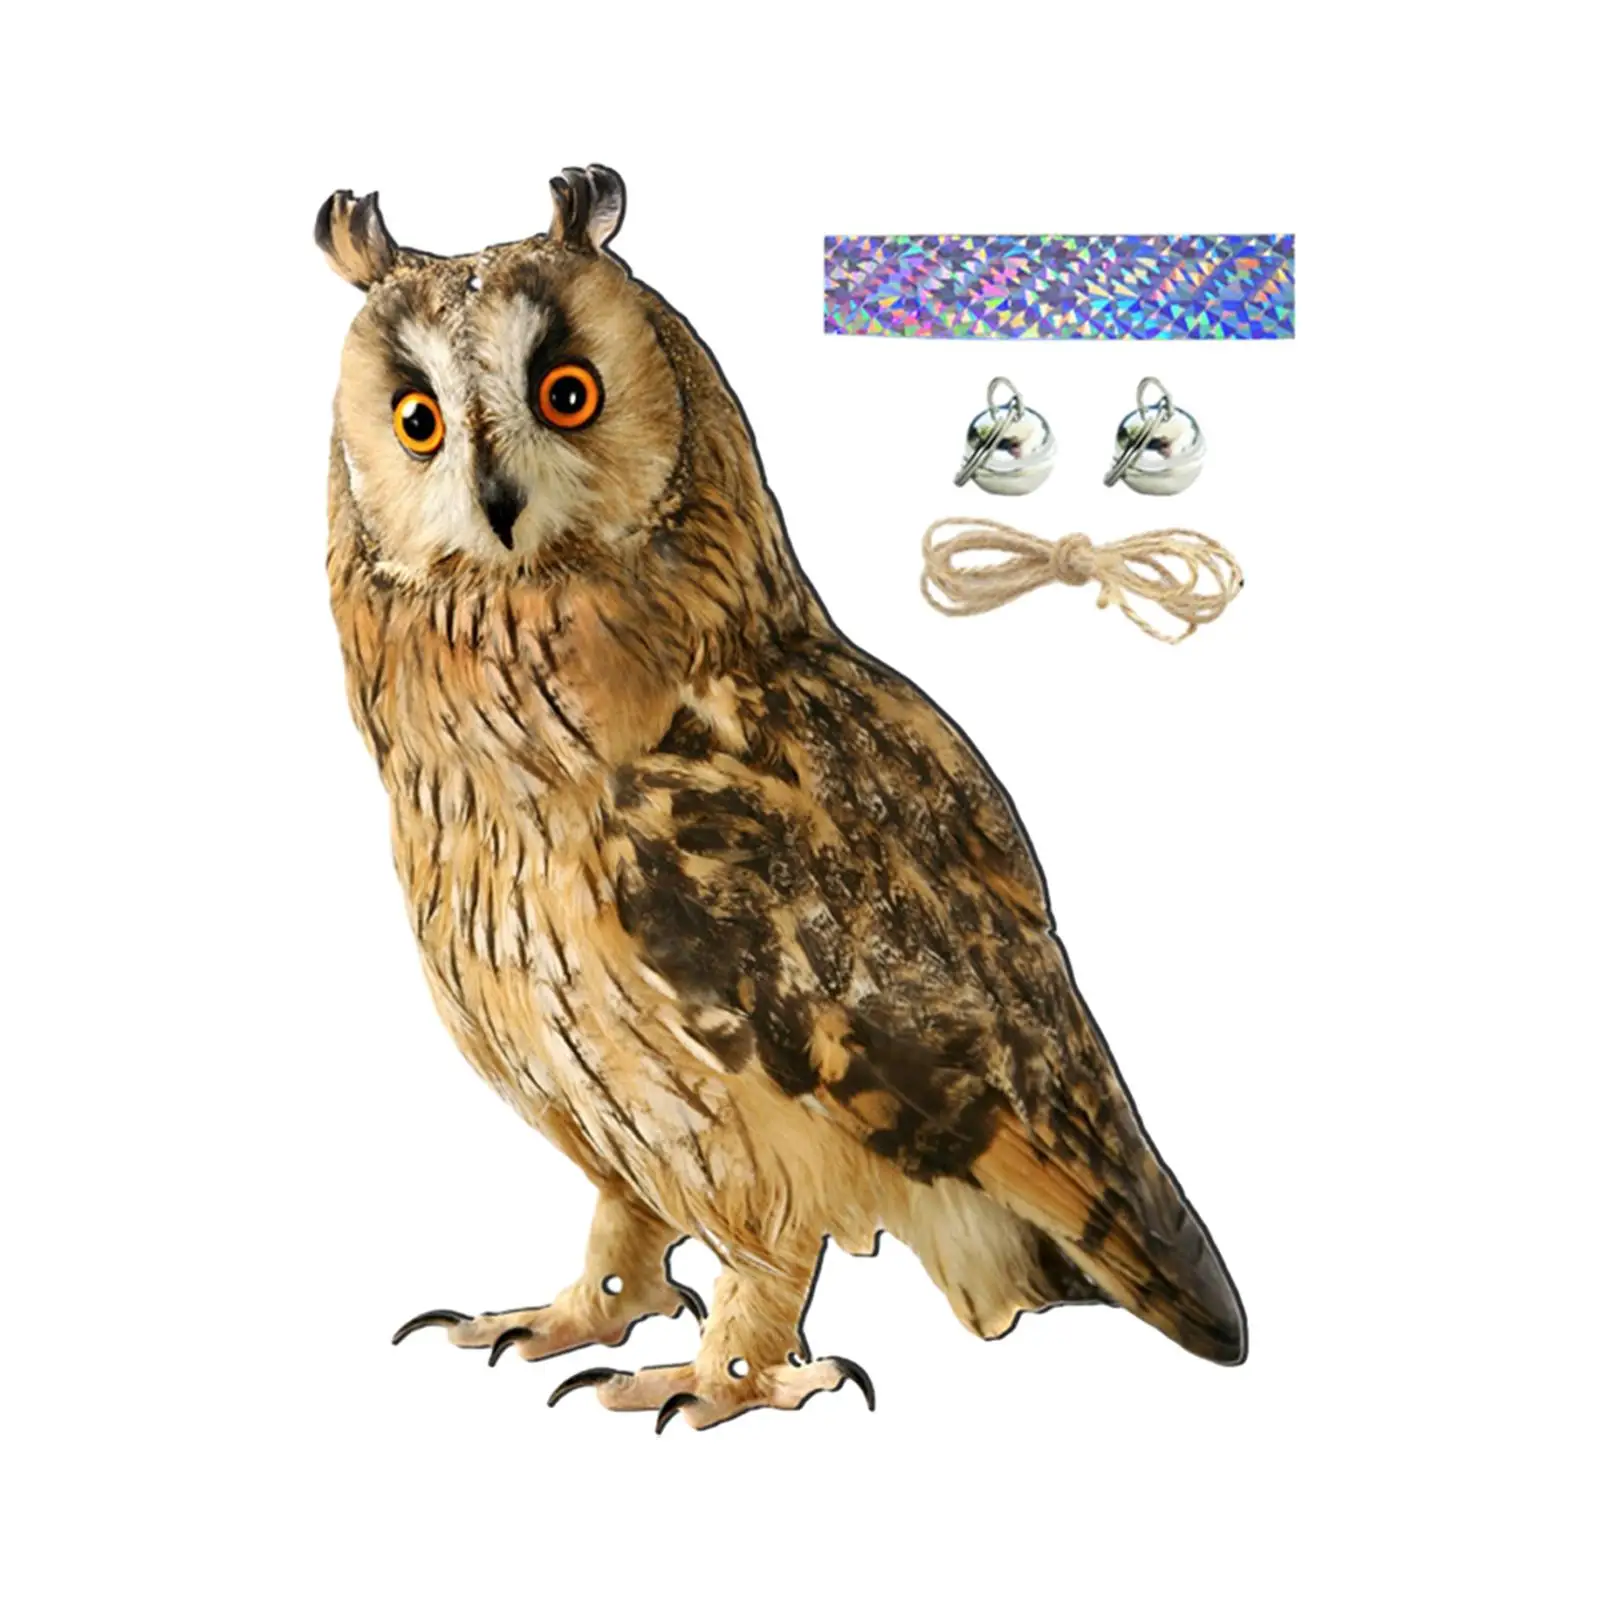 Fake Owl Decoration Owl to Frighten Birds Owl to Keep Birds Away Fake Owl Statue Decoy for Windows Rooftops Patio Yard Outdoor